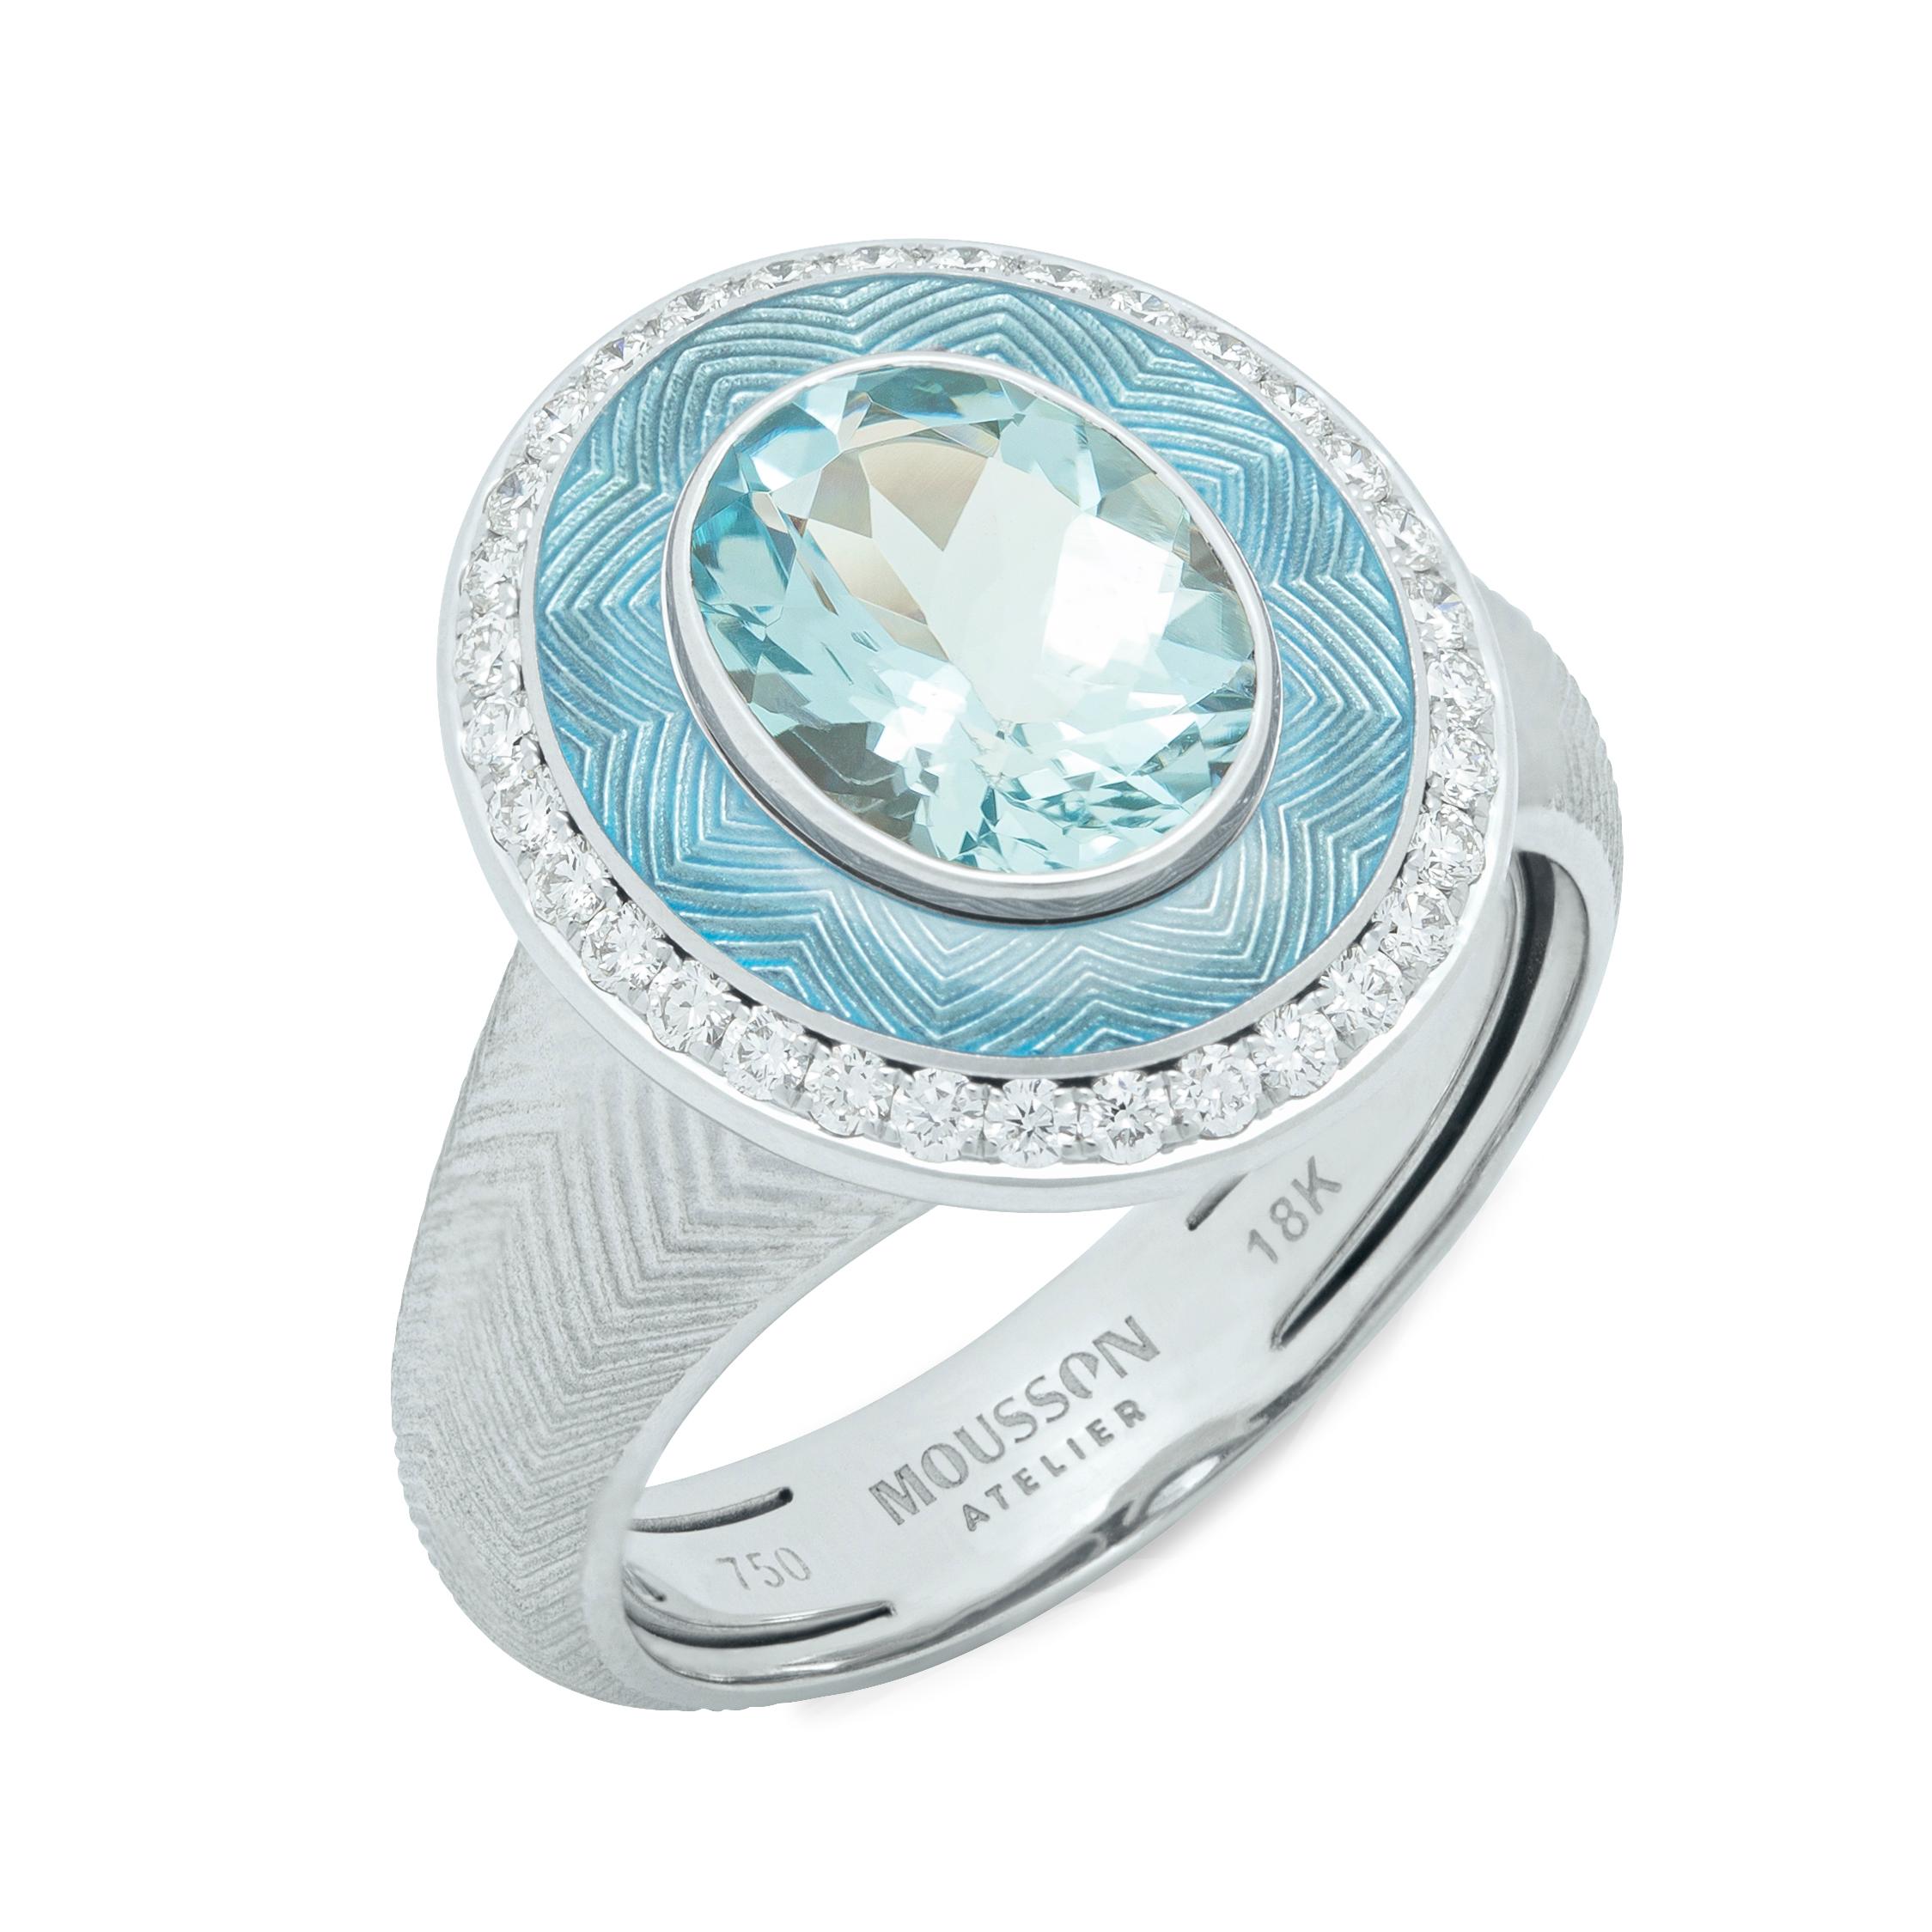 Aquamarine Diamonds 18 Karat White Gold Tweed Suite
Perhaps this is the brightest and most popular representative of the Pret-a-Porter collection. The texture of Tweed reminds of the well-known fabric, but most importantly, it reminds of the ancient